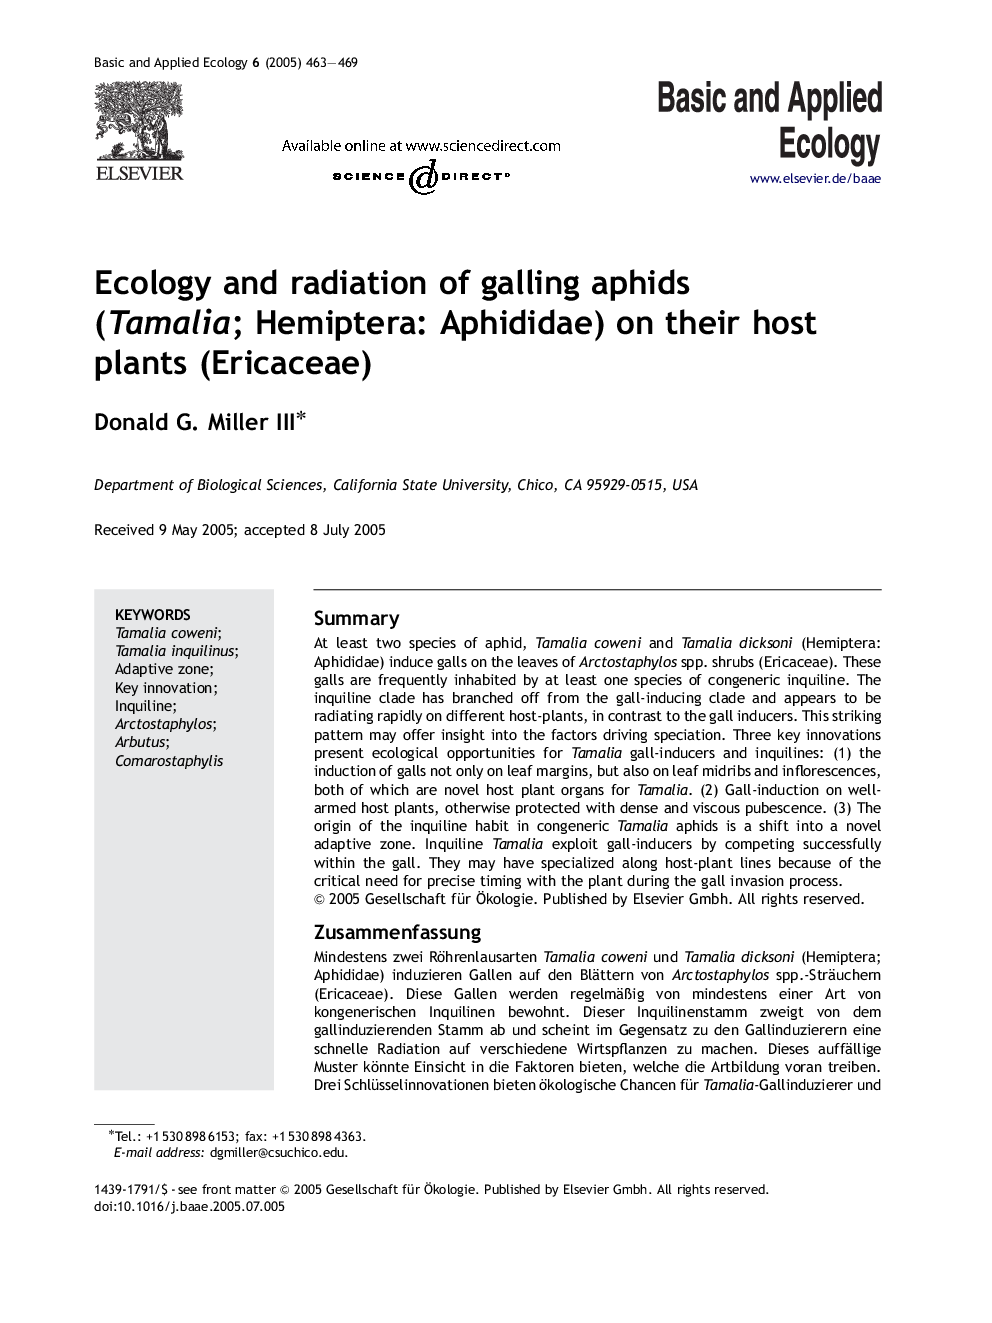 Ecology and radiation of galling aphids (Tamalia; Hemiptera: Aphididae) on their host plants (Ericaceae)